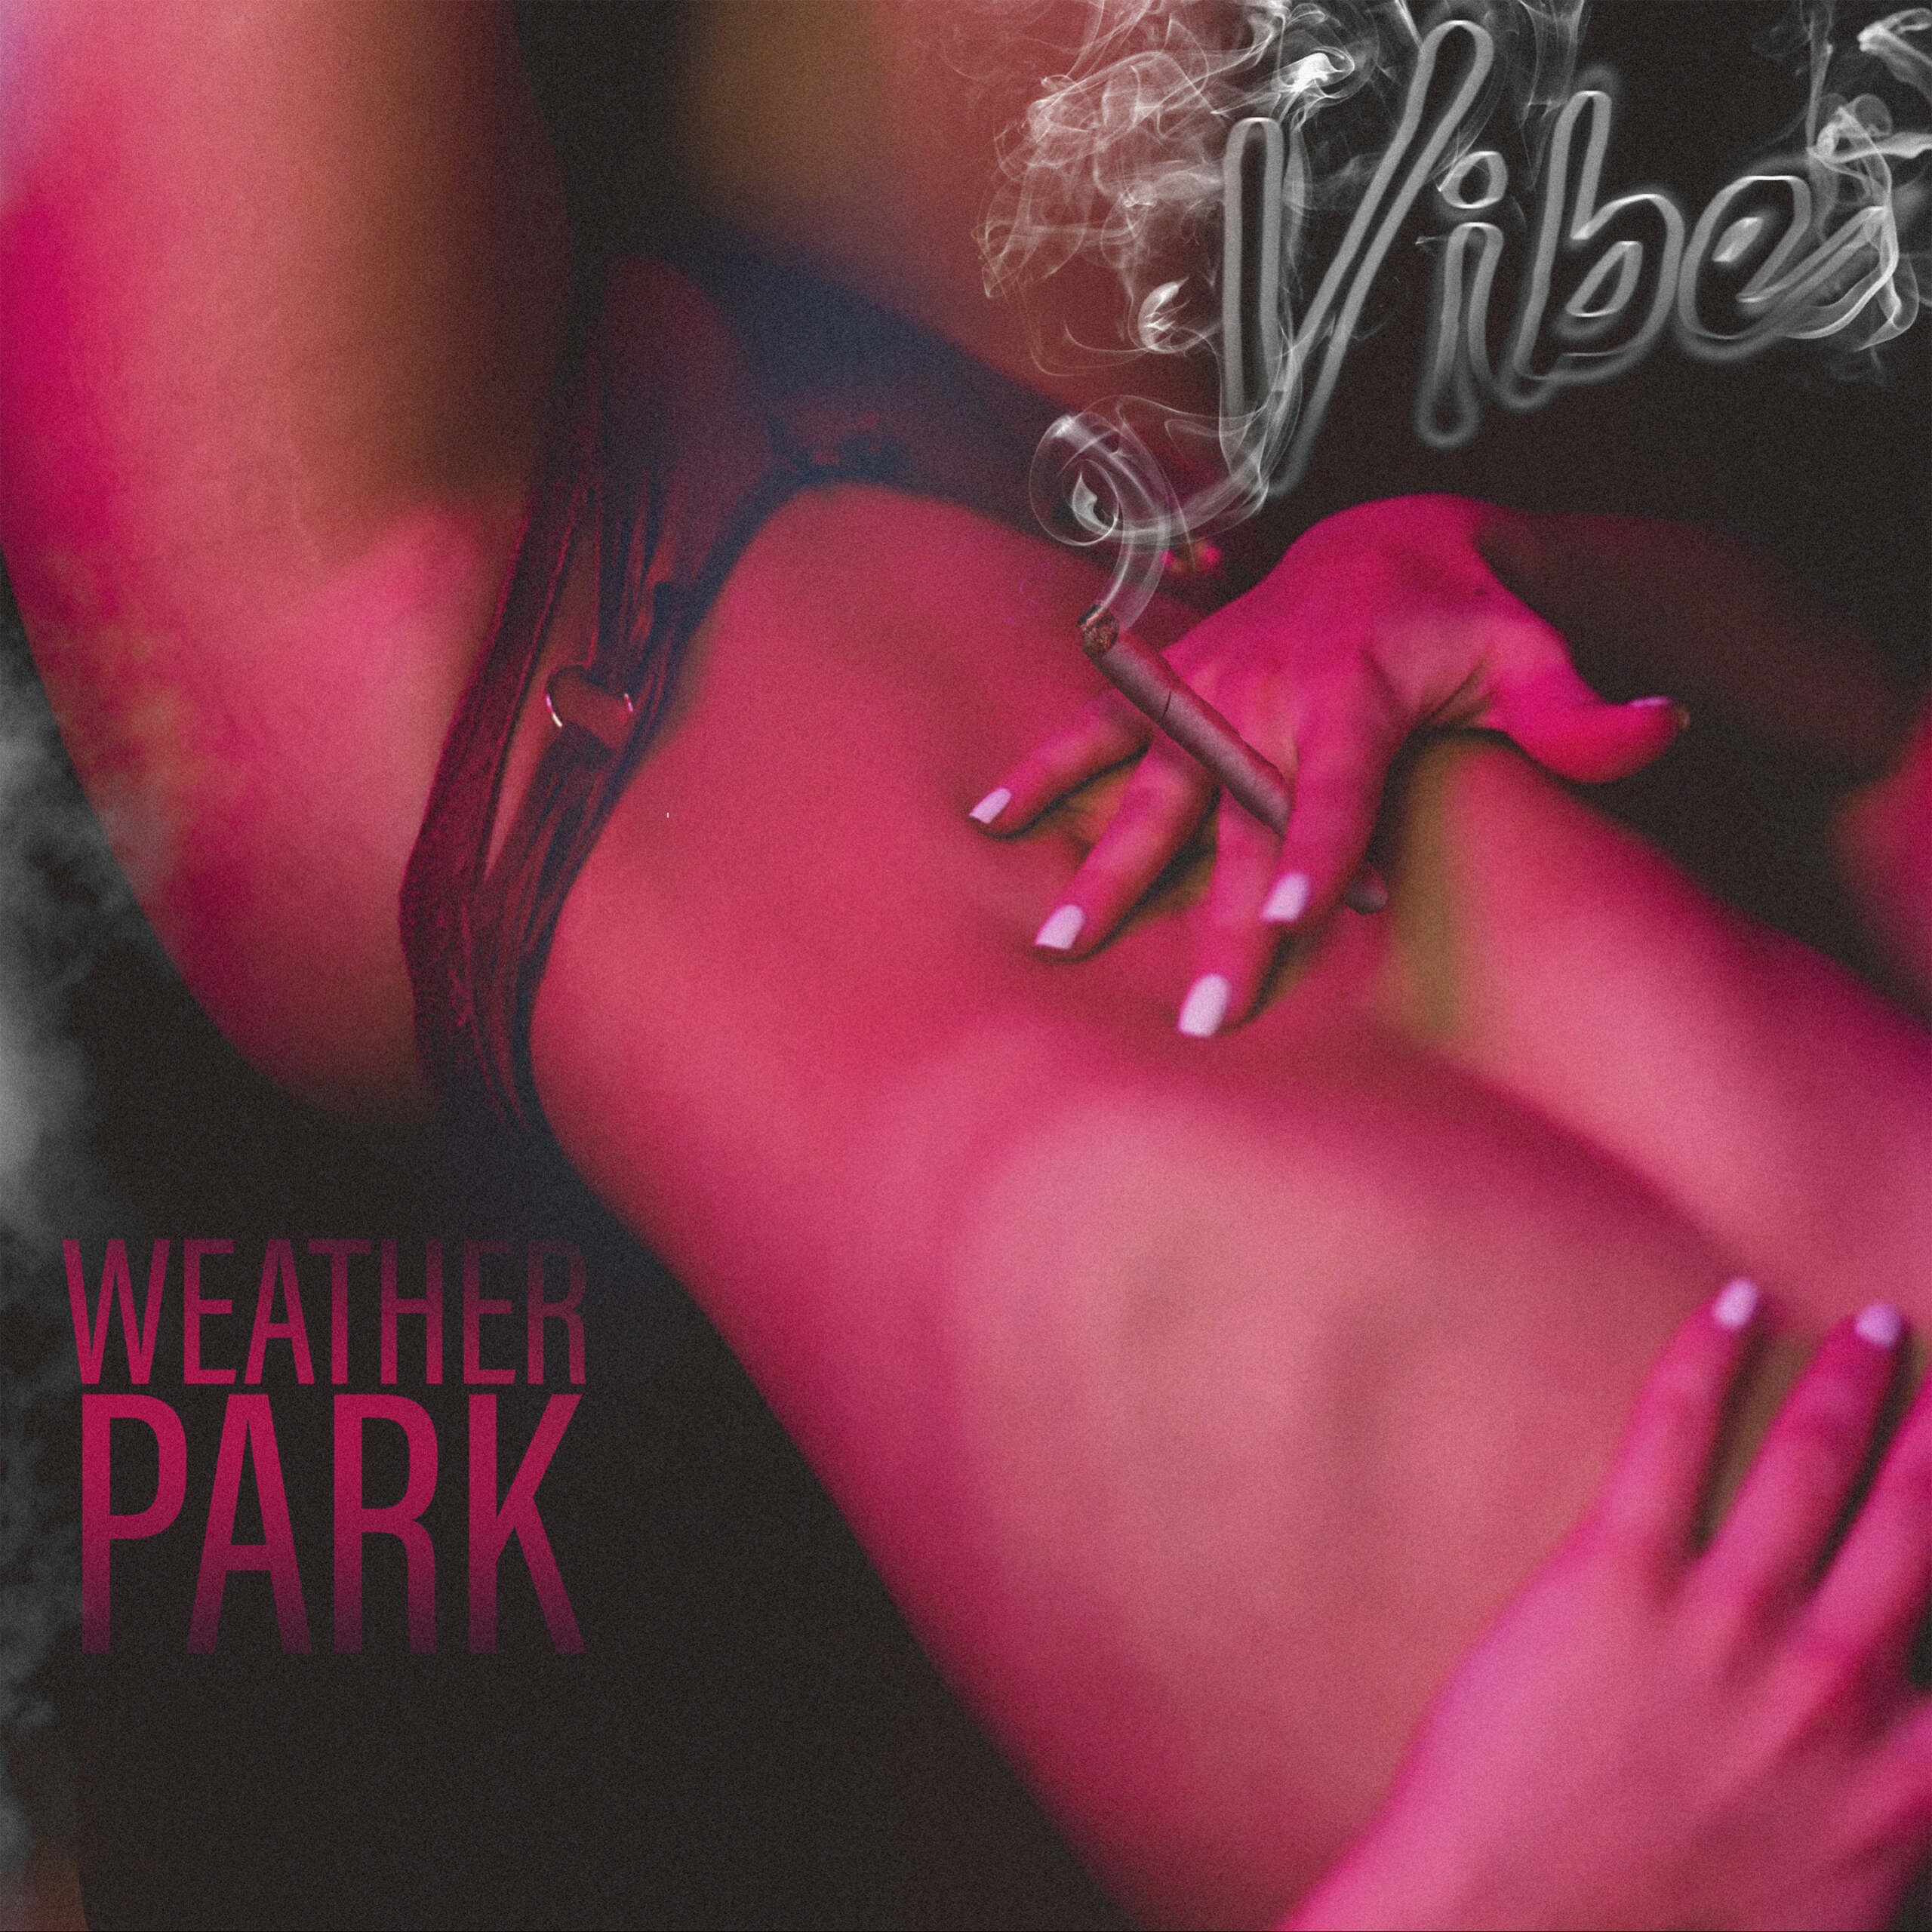 Weather Park - Vibe [Video]